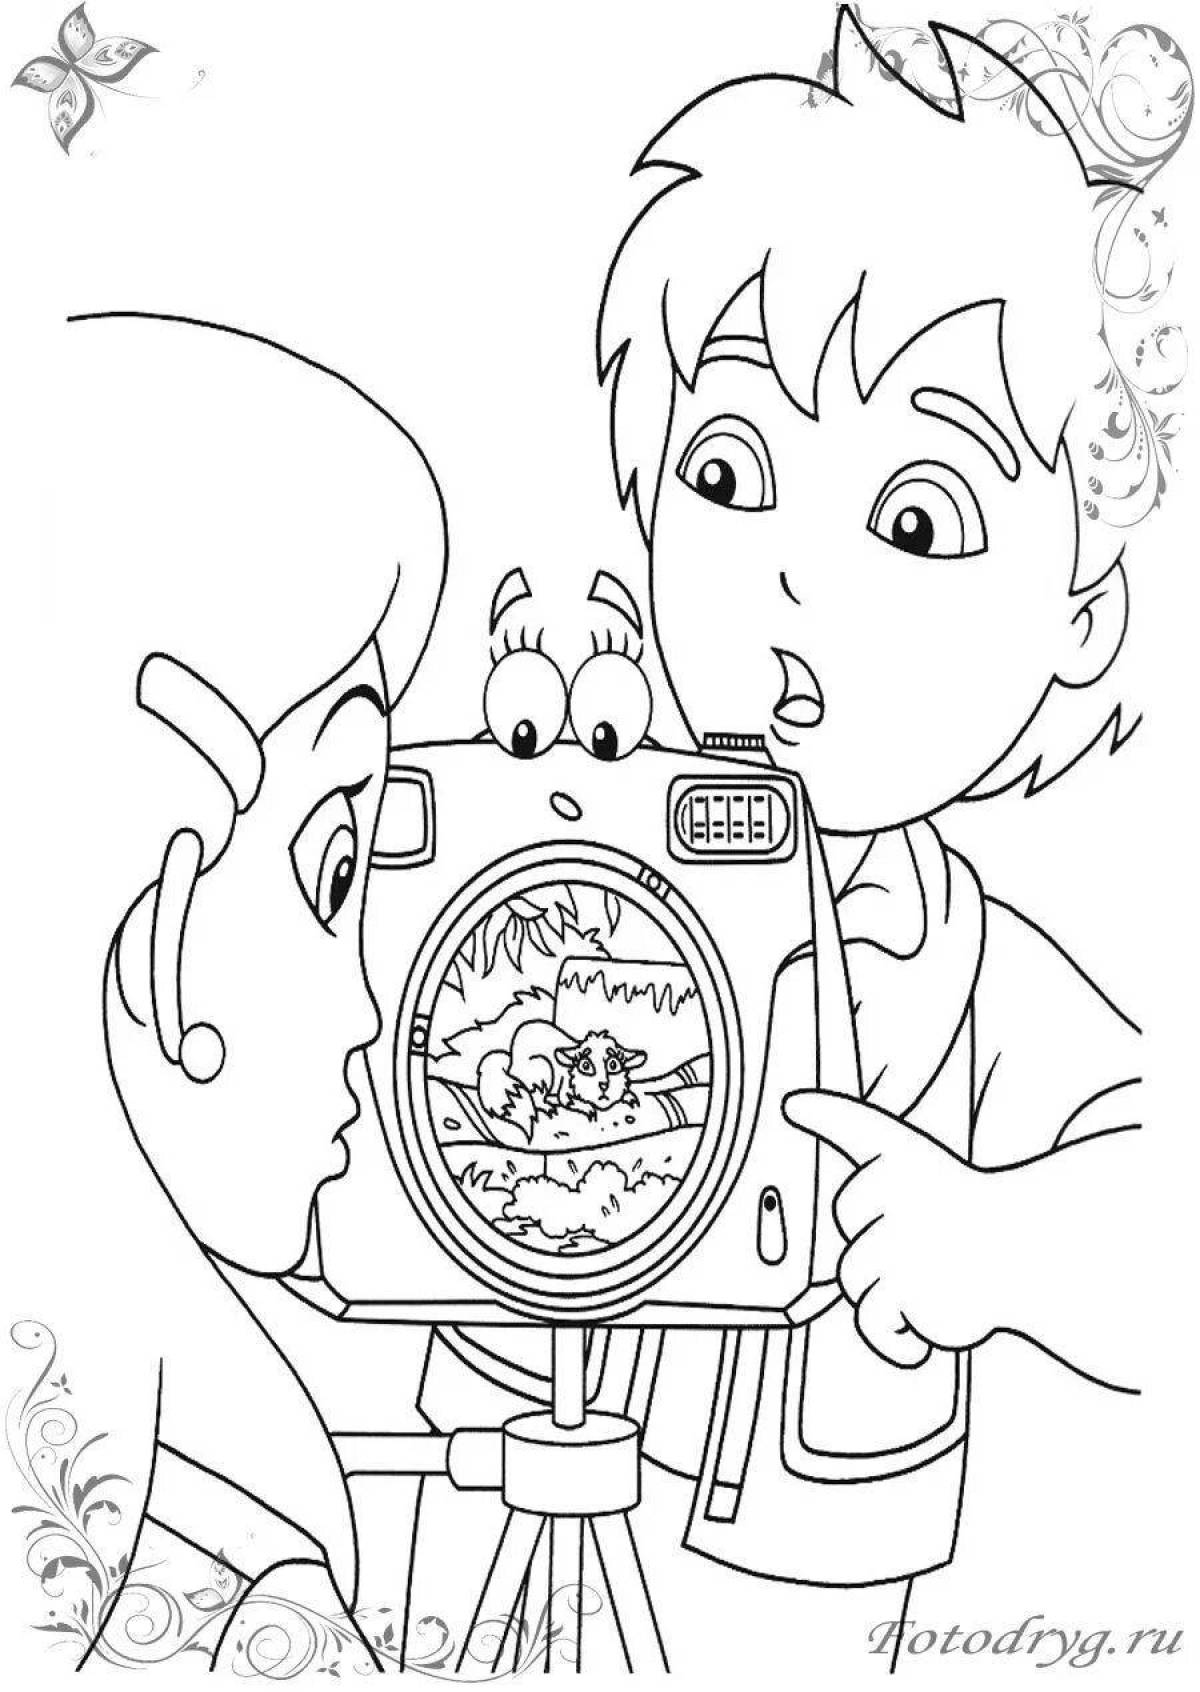 Diego's attractive coloring page